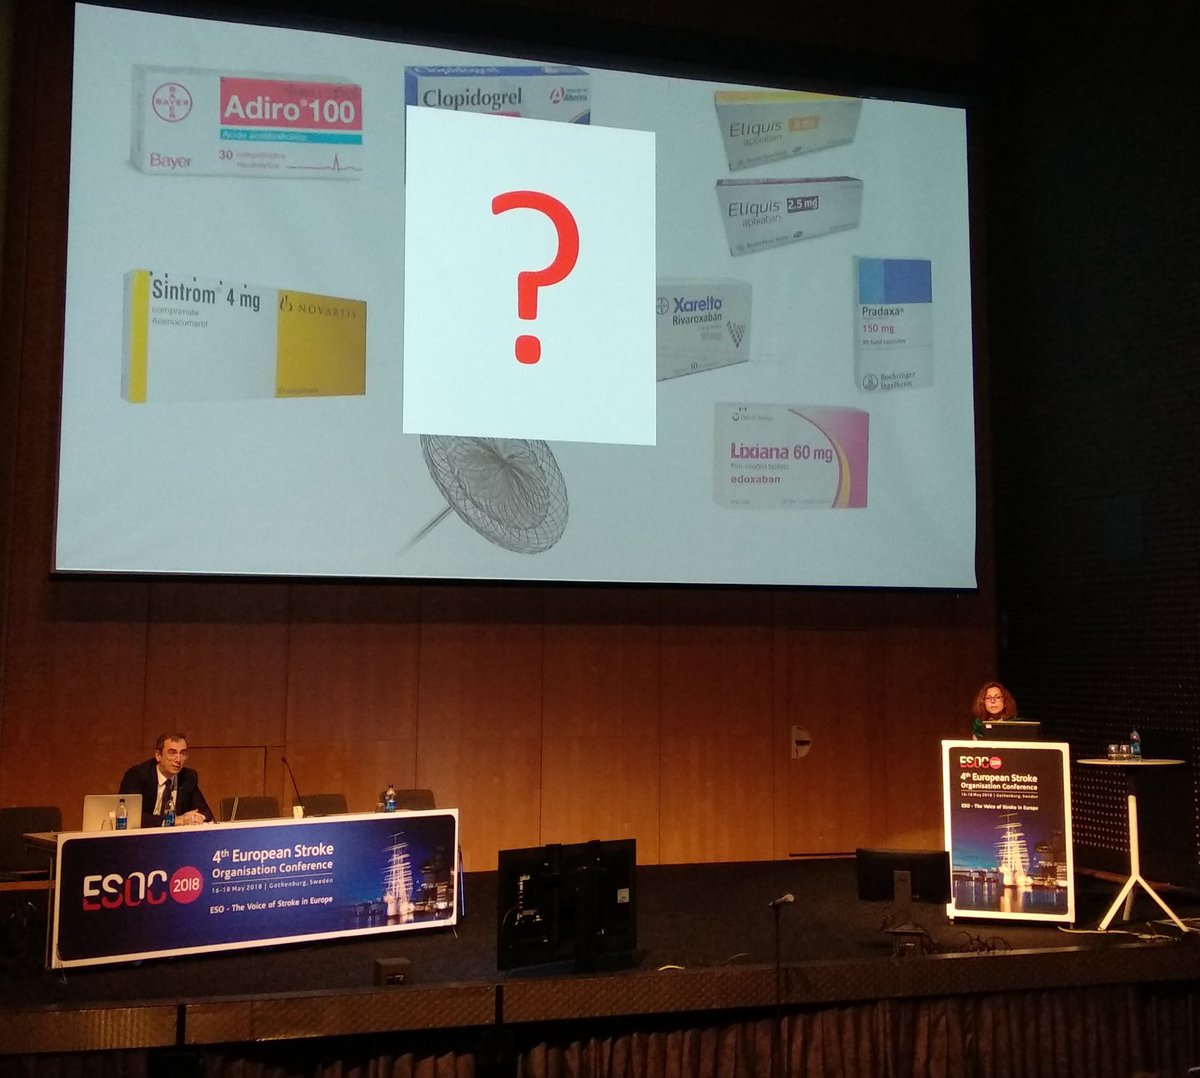 Overview of the ESUS, concept, diagnosis and treatment by Dr. Marta Rubiera (@mrubifu) at #ESOC2018.